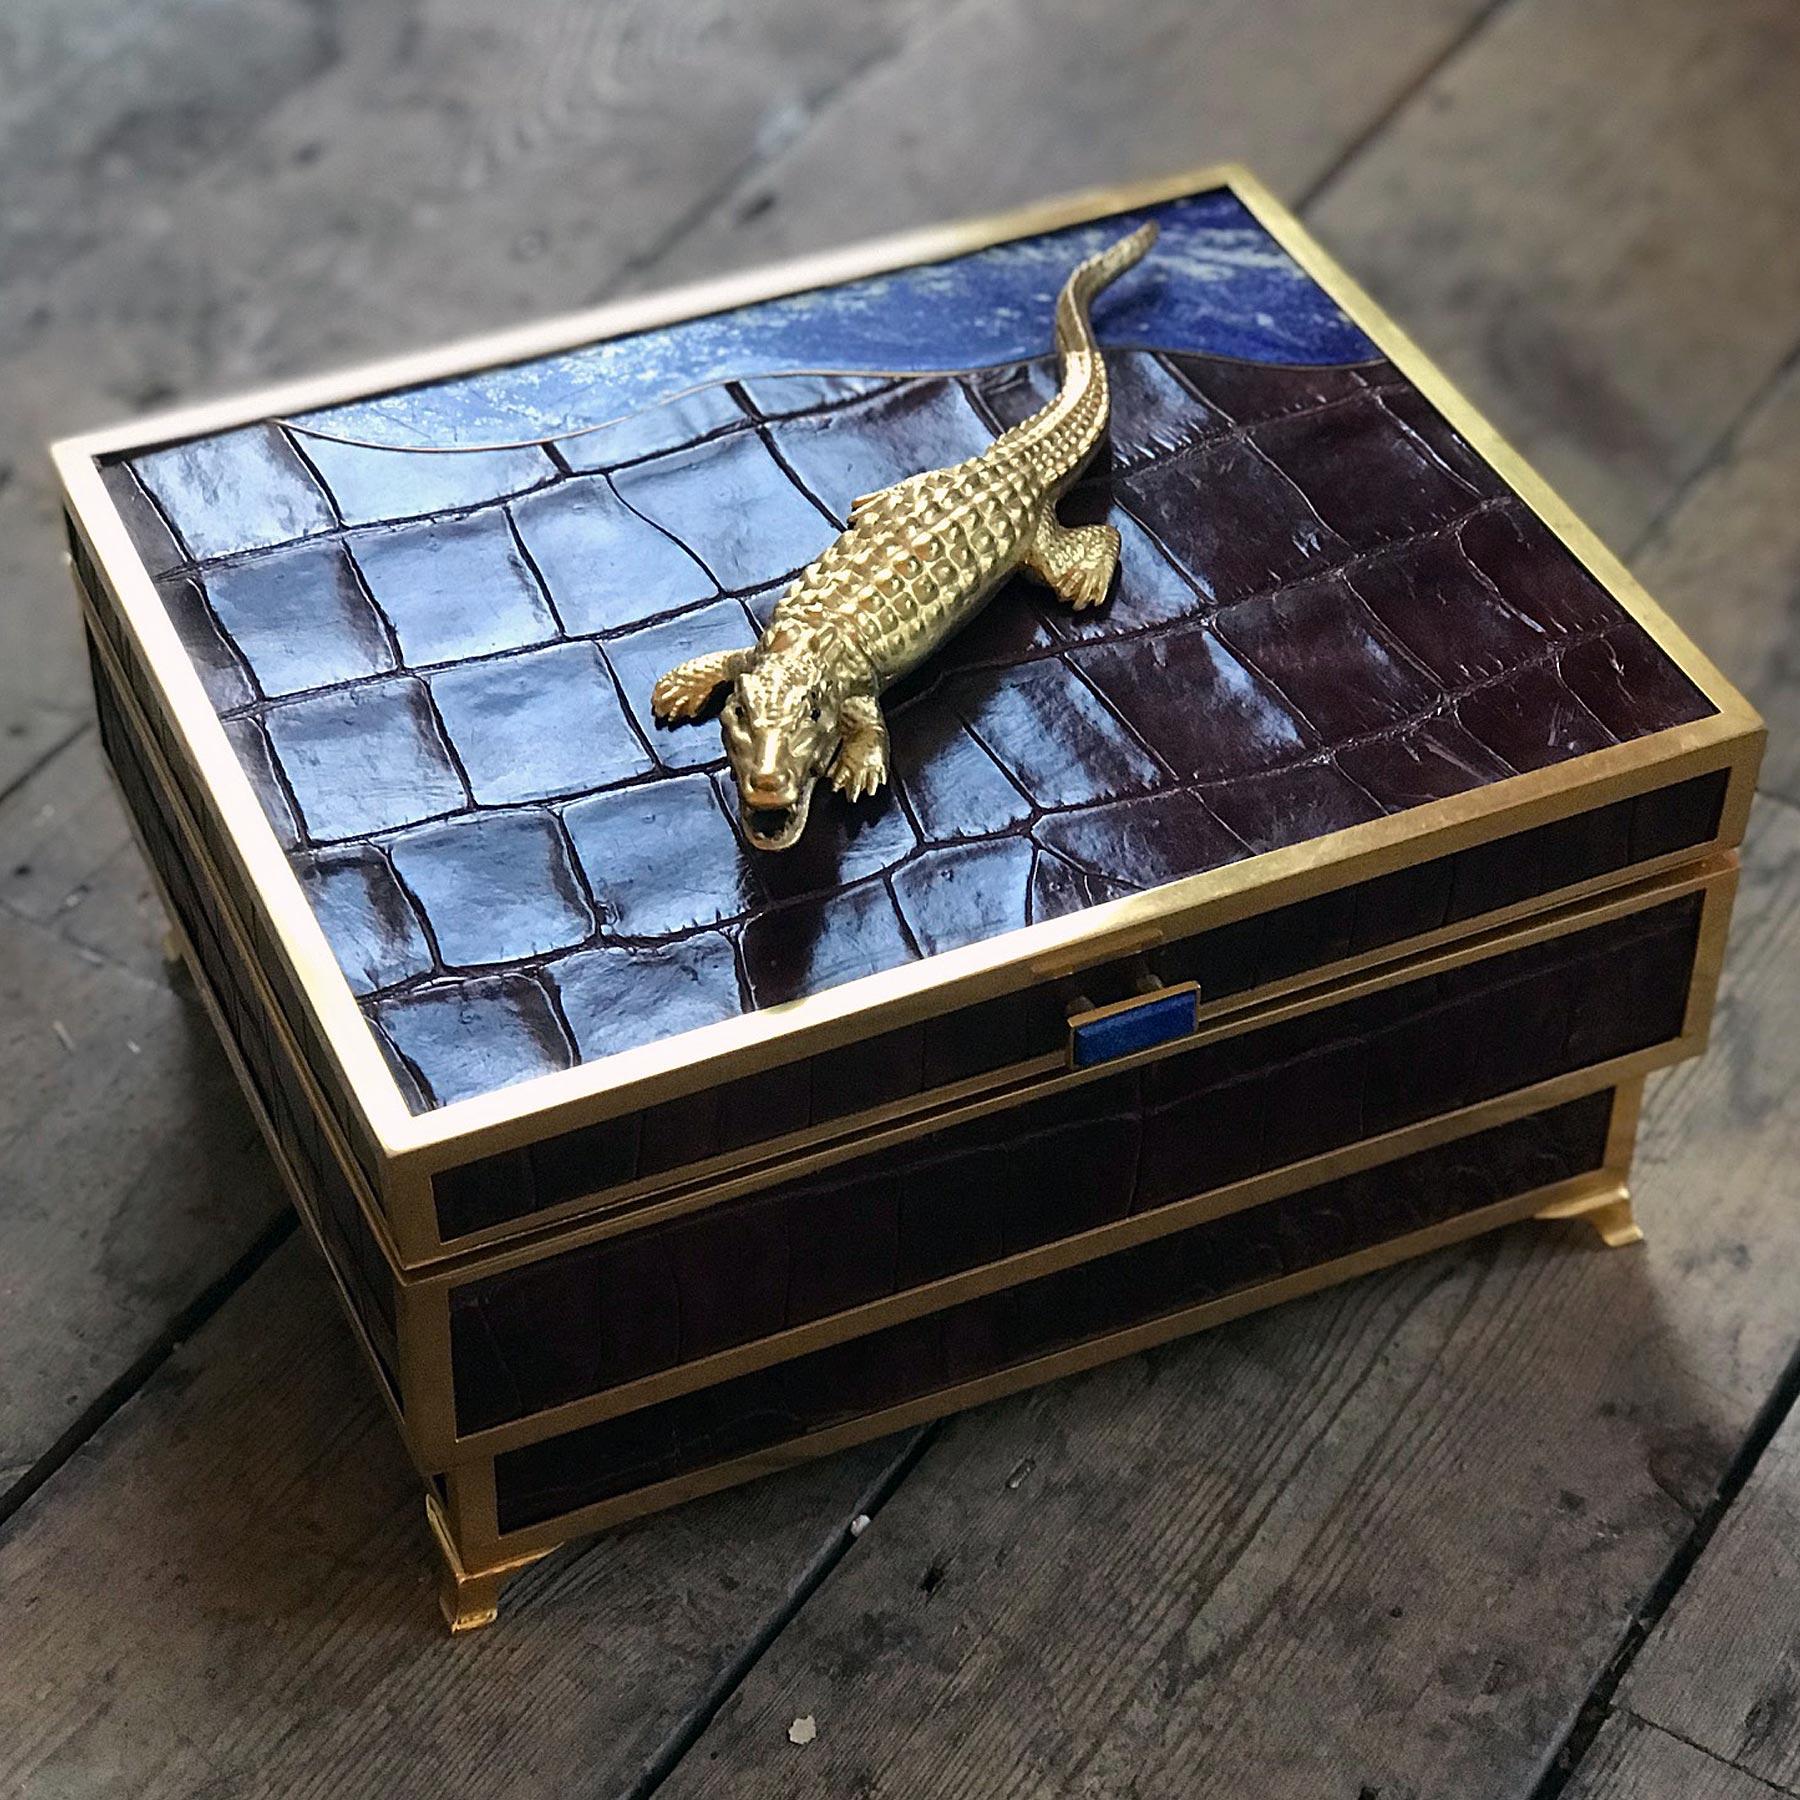 An impressive humidor by Glynn Lockett applied with Crocodile skin and gilt mounts.

The top surmounted with a crocodile with sapphire eyes, next to an undulating lapis lazuli panel simulating a river, the cedar wood fitted interior with gilt